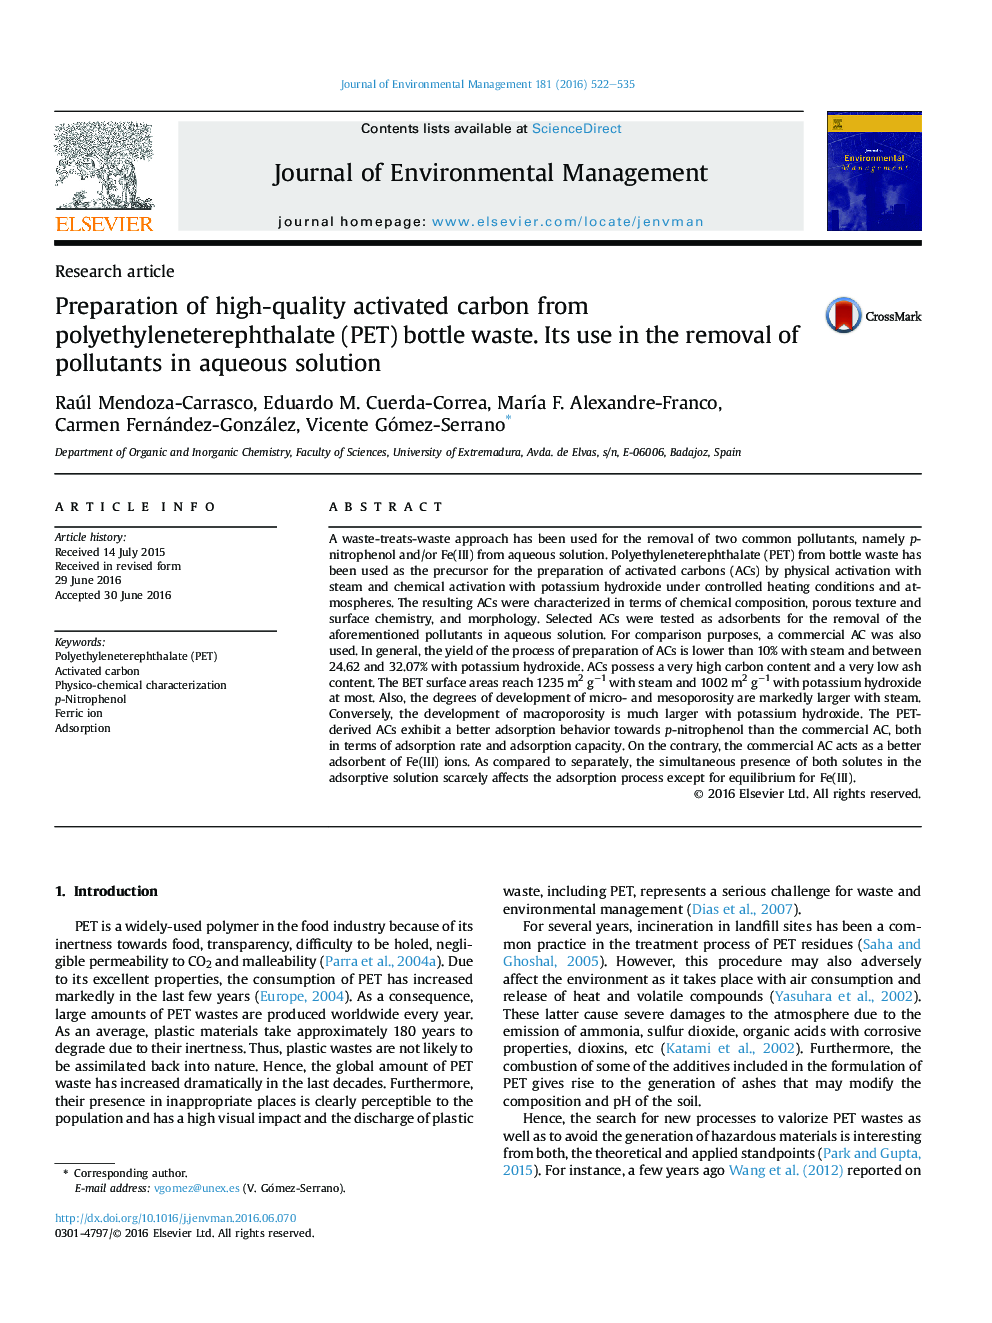 Preparation of high-quality activated carbon from polyethyleneterephthalate (PET) bottle waste. Its use in the removal of pollutants in aqueous solution